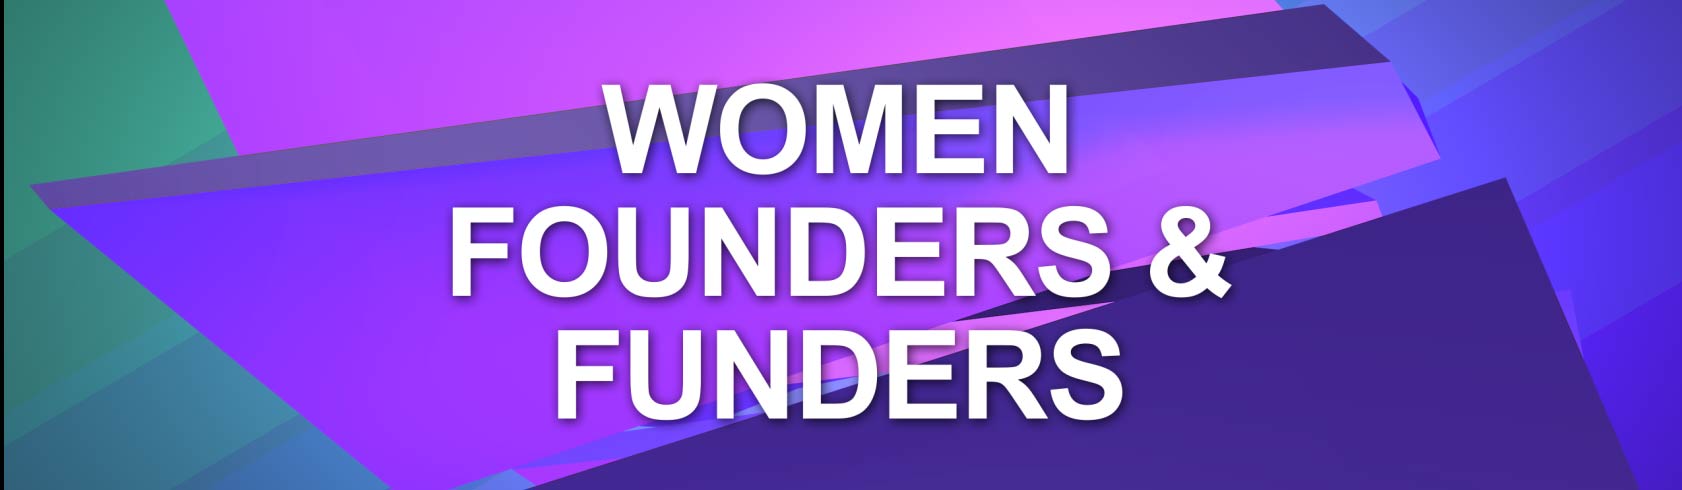 WOMEN FOUNDERS AND FUNDERS